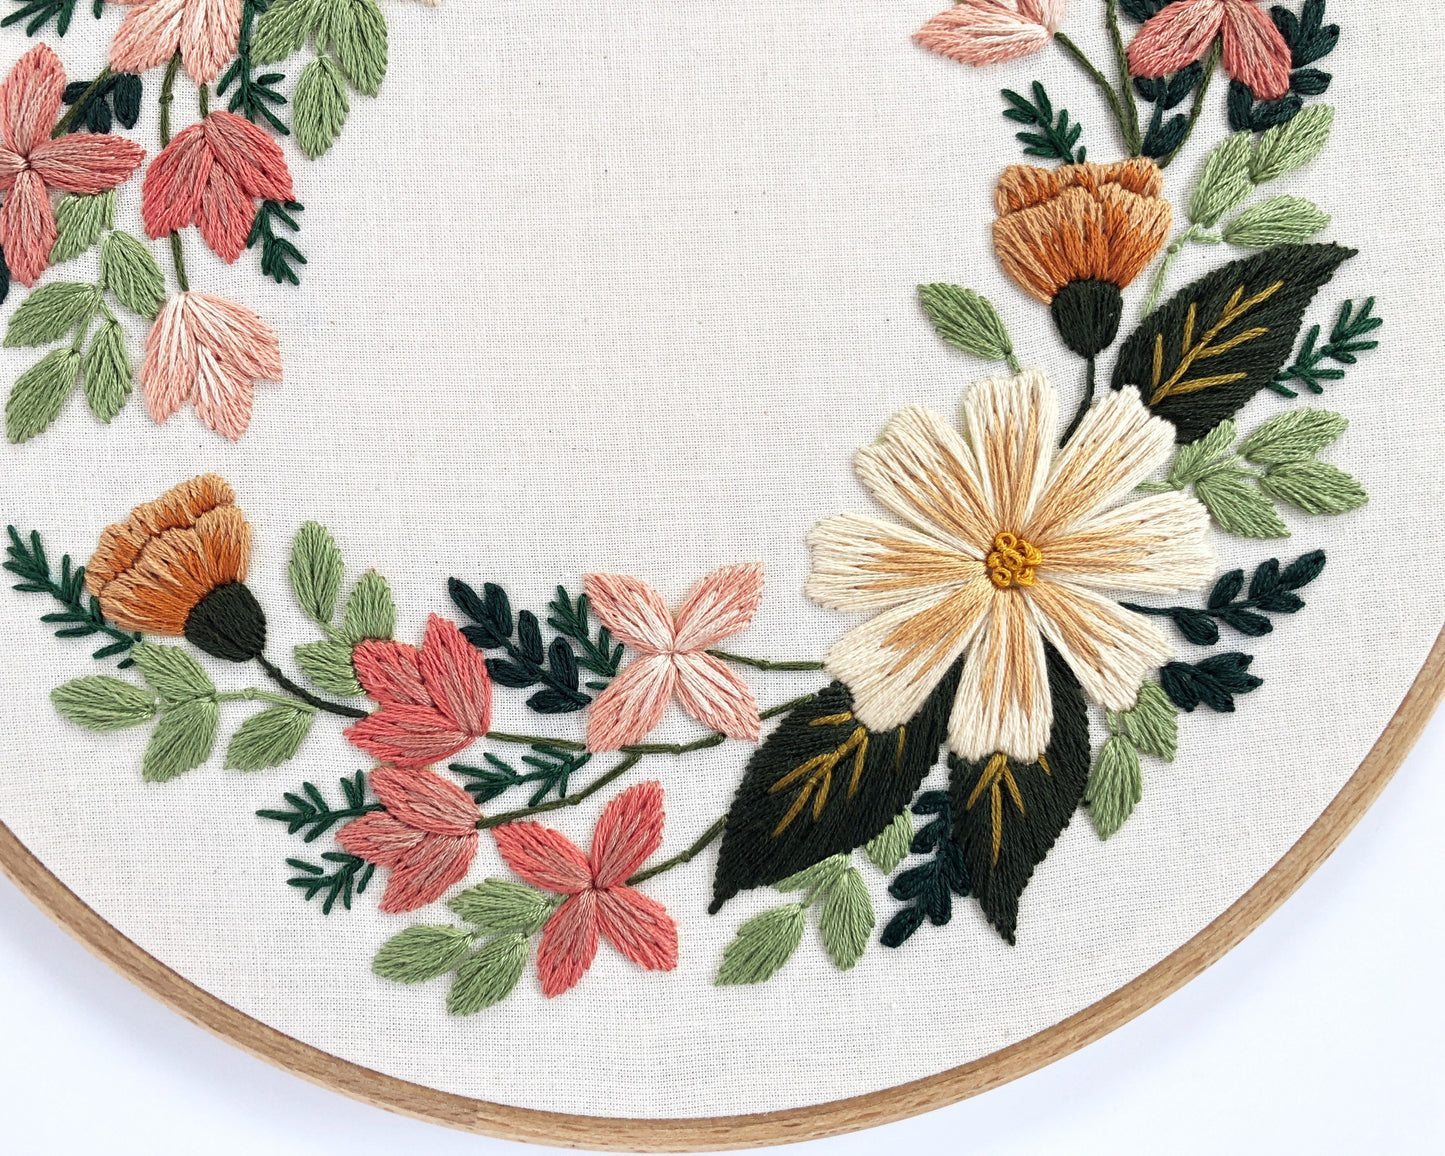 Floral wreath, flower wall hanging, folk home decor, floral embroidery, Mother's Day gift, 10" embroidery hoop, unbleached cotton fabric